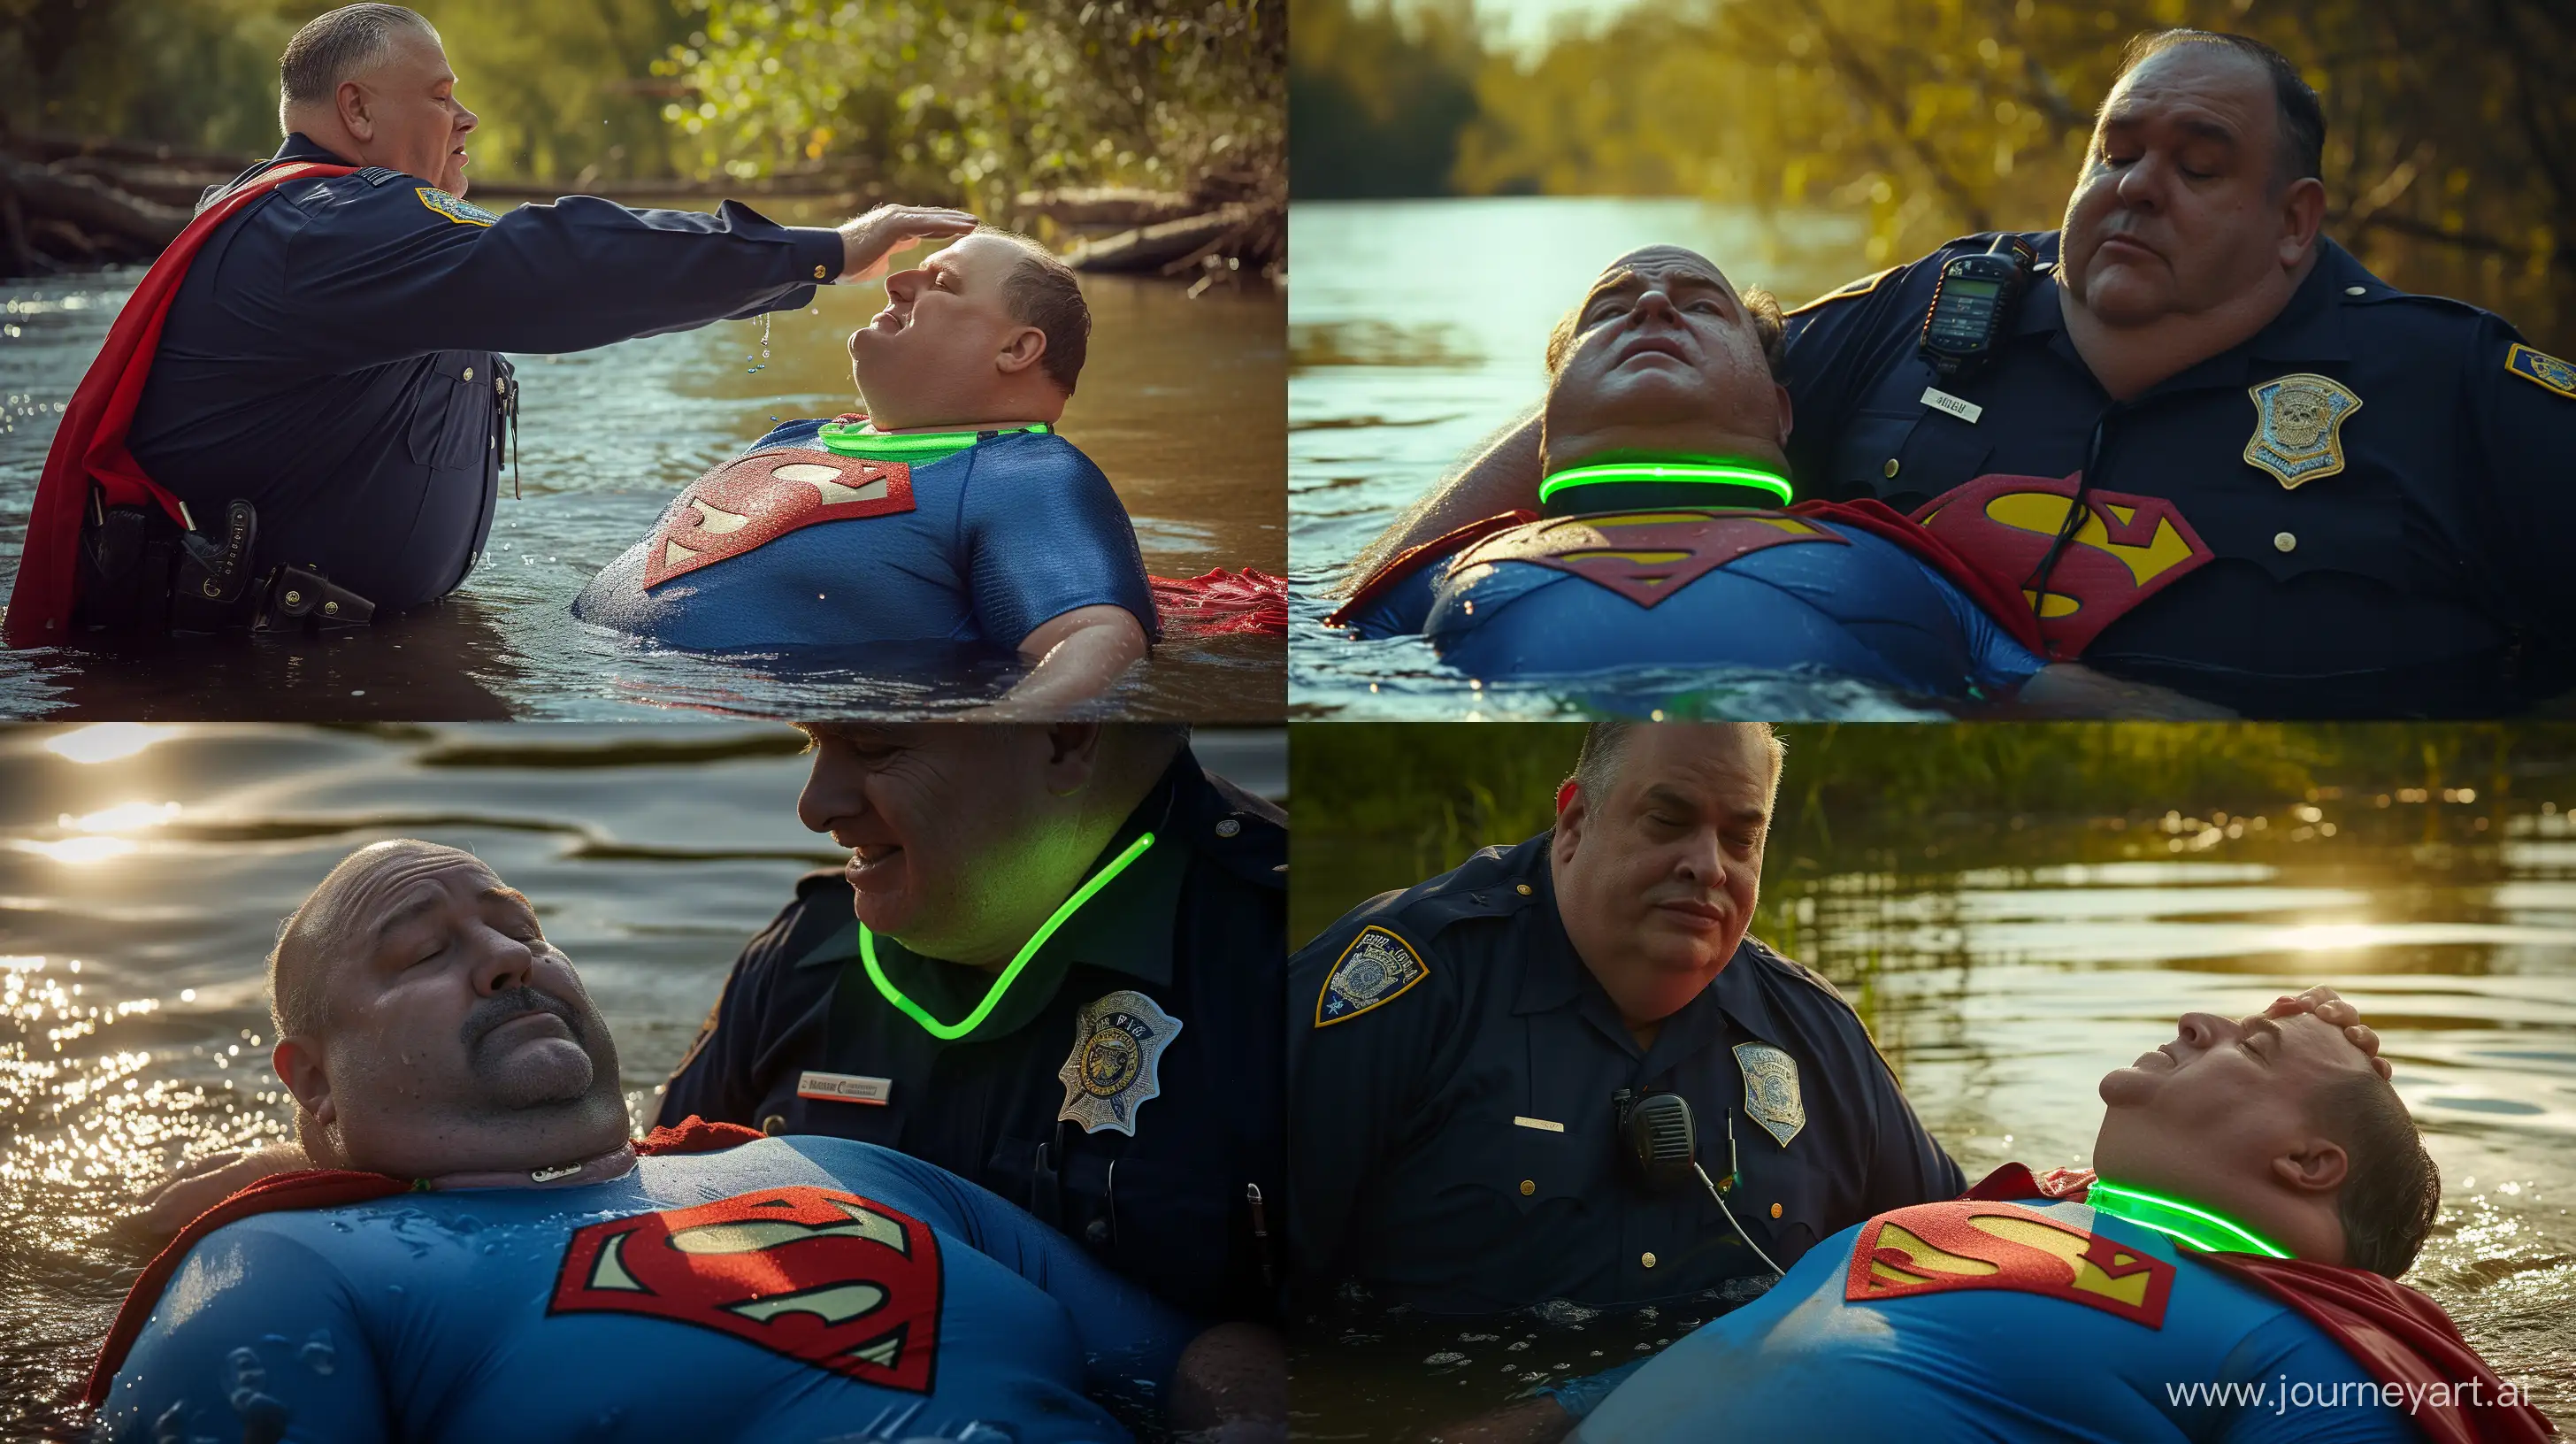 Elderly-Policeman-Assists-Distressed-Superman-in-River-Rescue